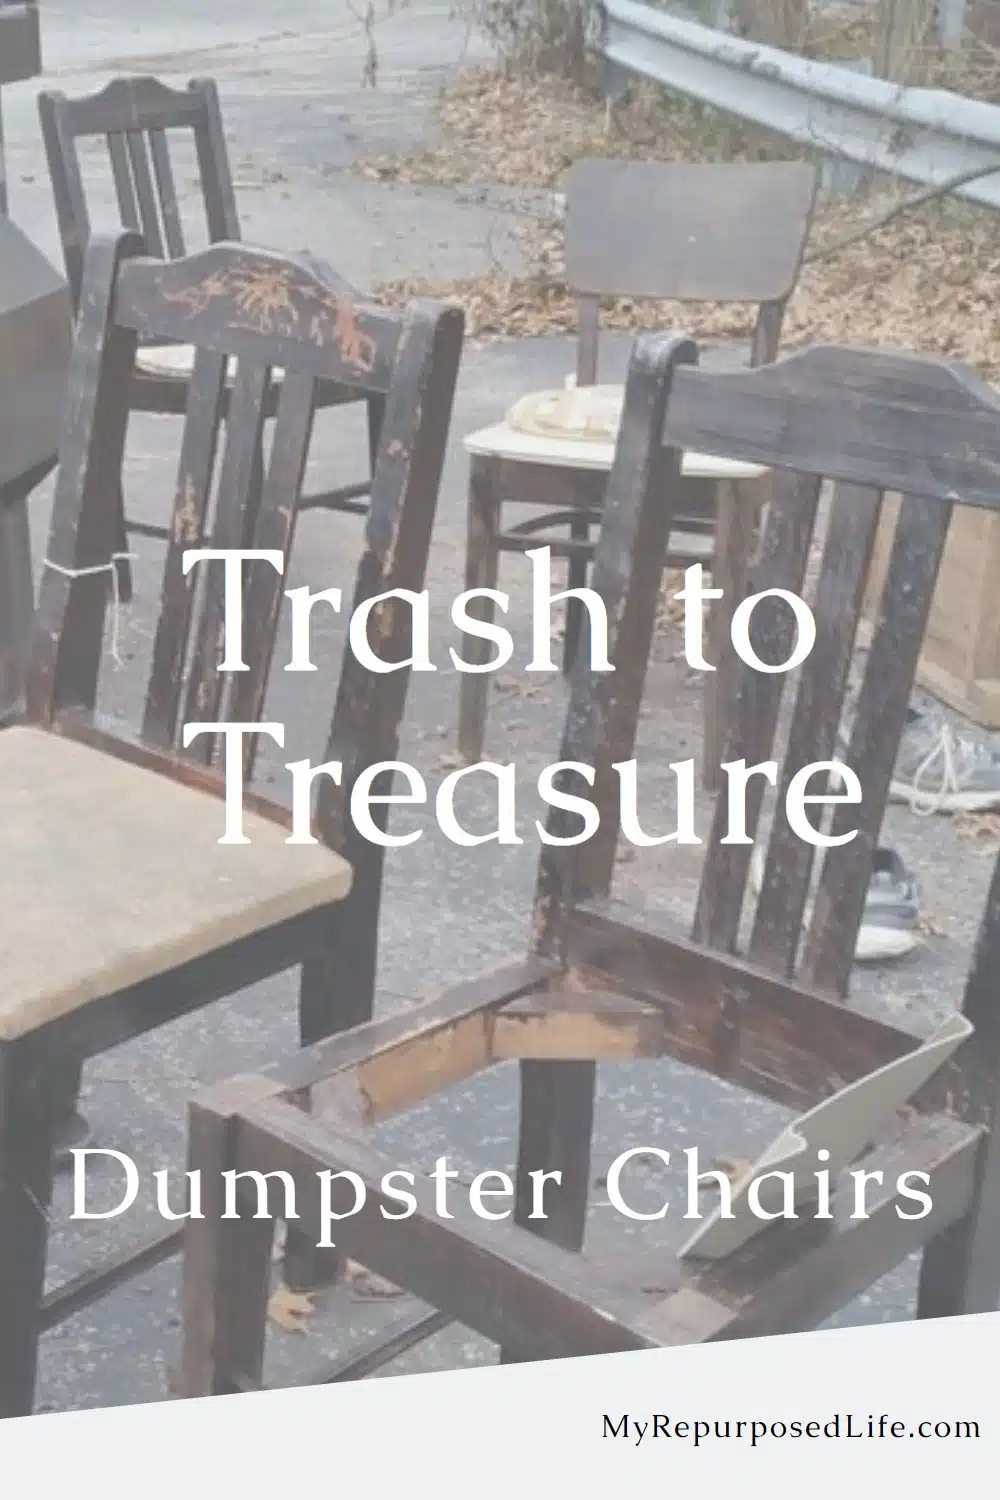 How to make a bench from three dumpster chairs. Easiest chair bench tutorial you will find. How did I get the perfect red? All the details included for you. #MyRepurposedLife #repurposed #furniture #chair #bench #tutorial #diy via @repurposedlife